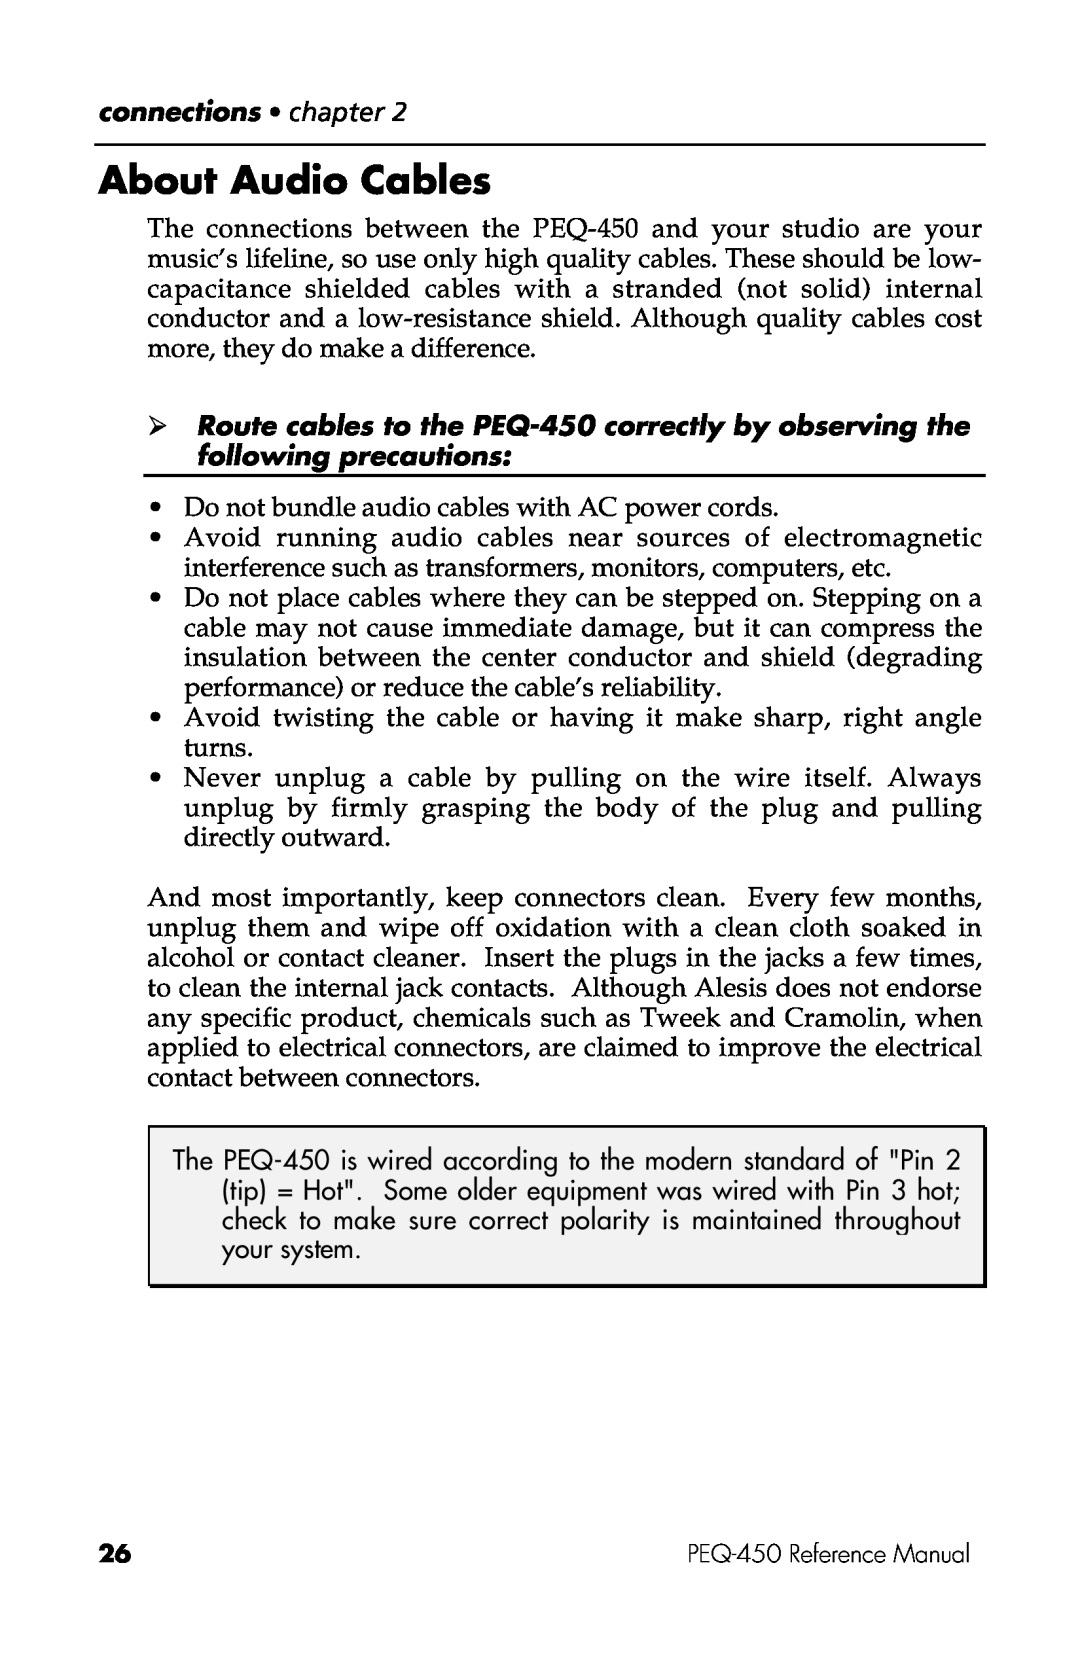 Alesis PEQ-450 manual About Audio Cables, connections chapter 